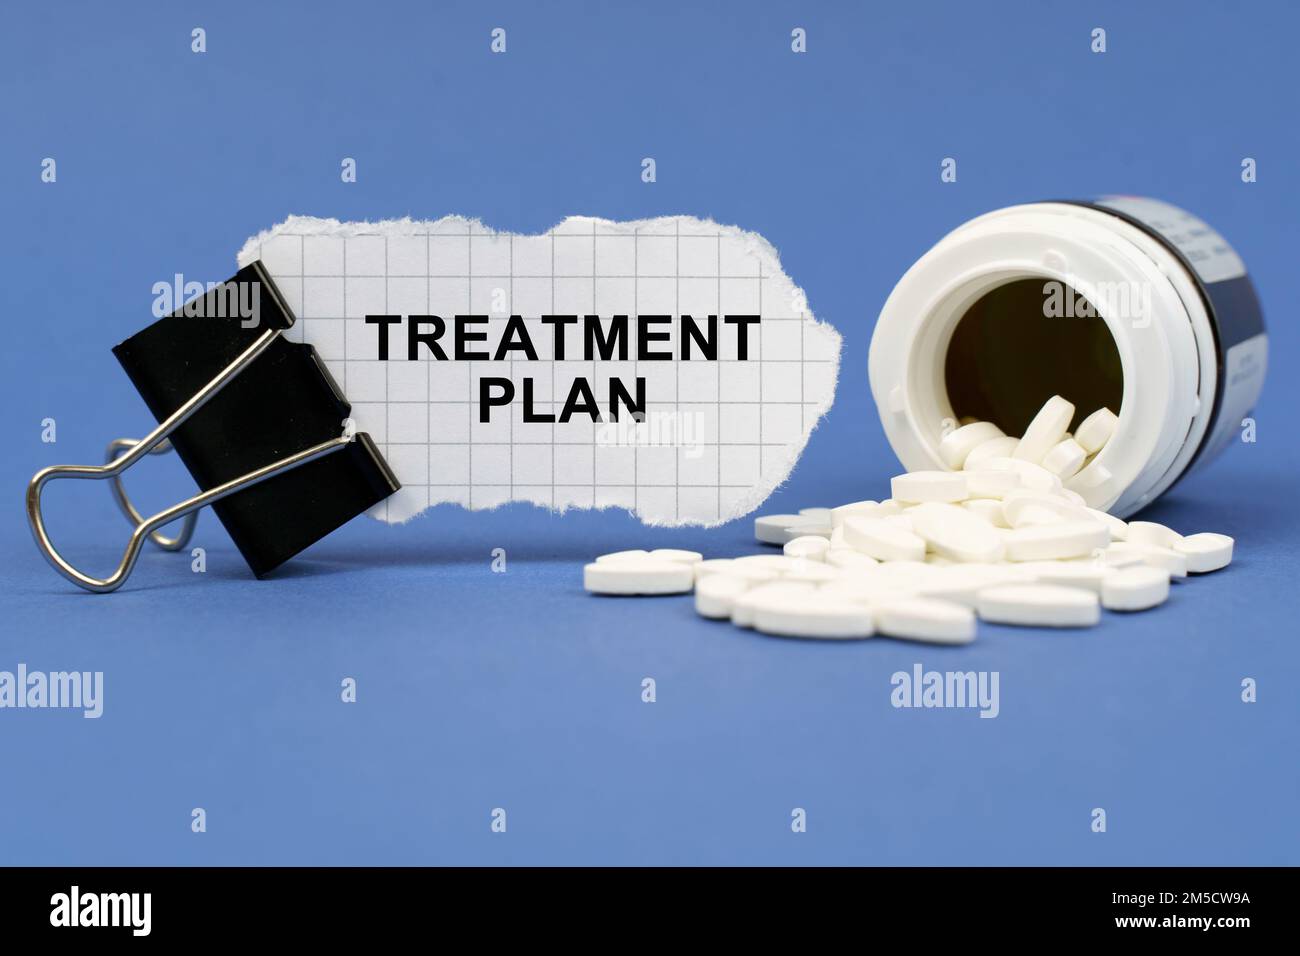 Medicine concept. On the blue surface lies a jar of pills and a clip with paper on which is written - TREATMENT PLAN Stock Photo